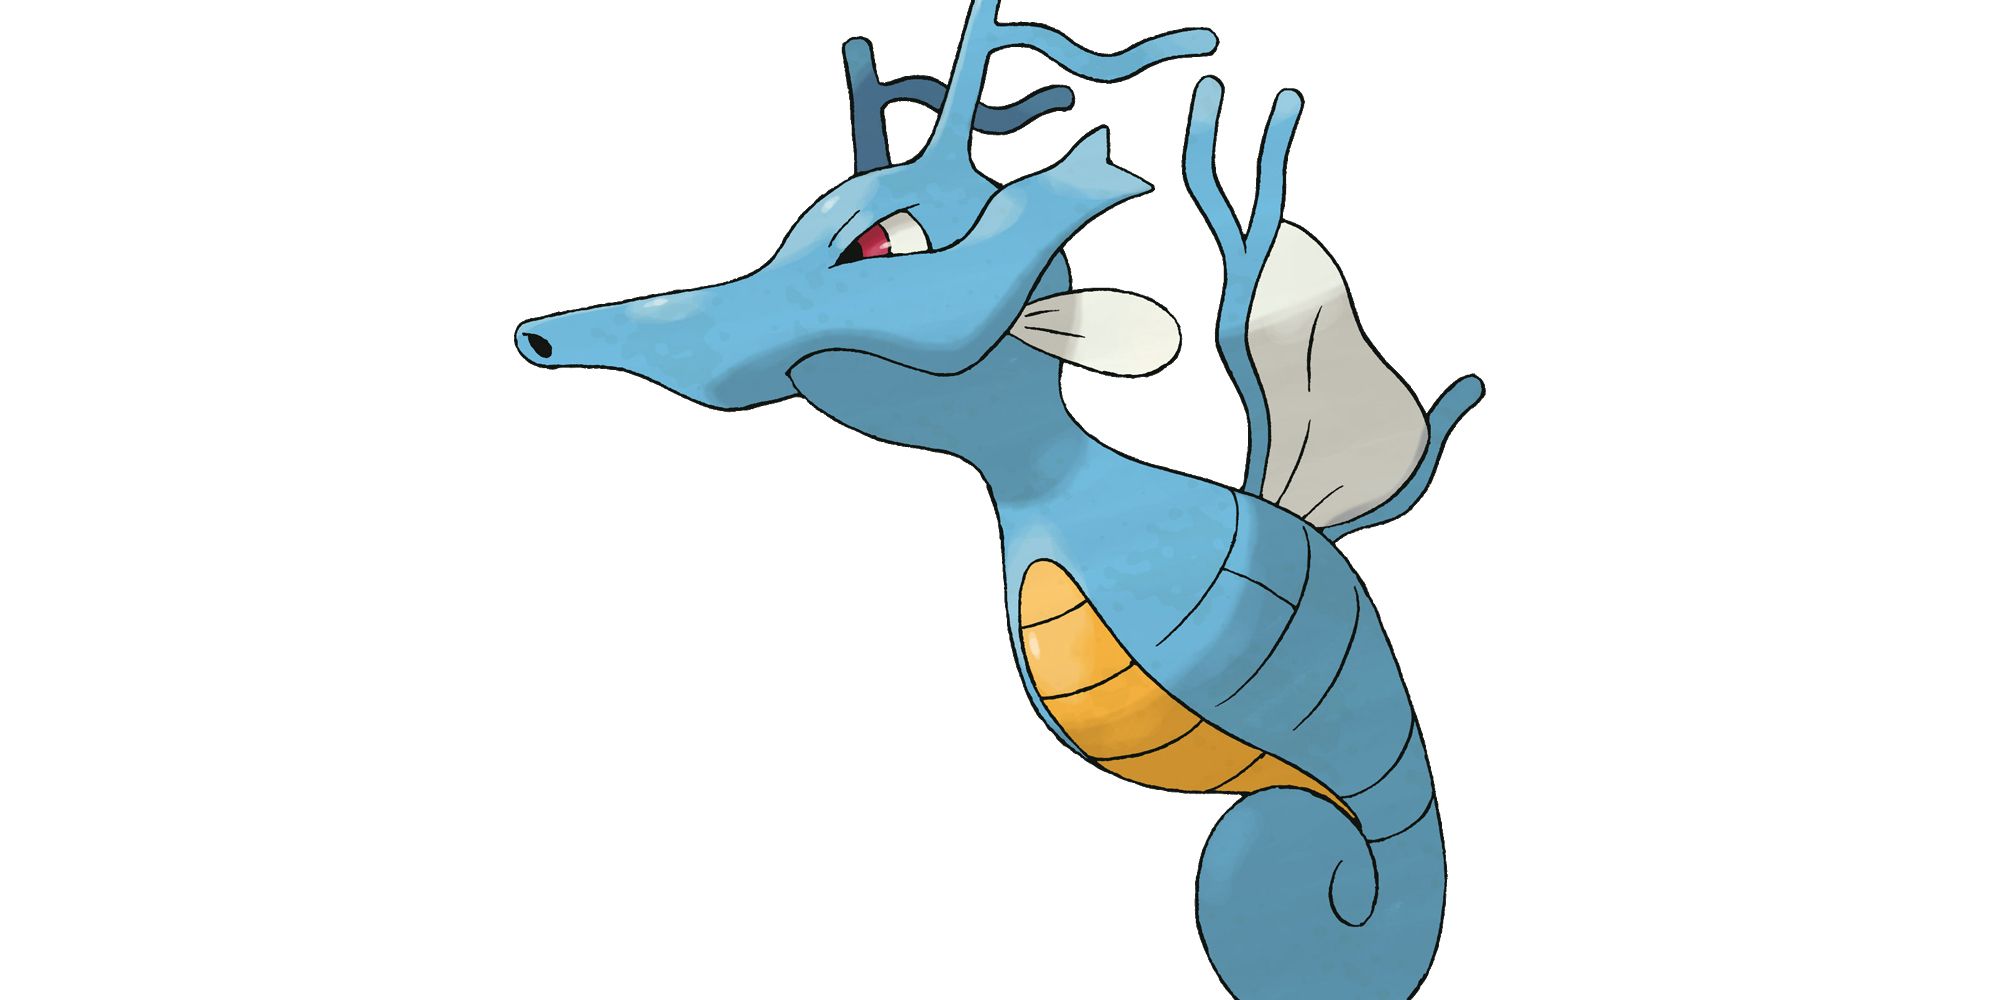 Kingdra against a white background in Pokémon